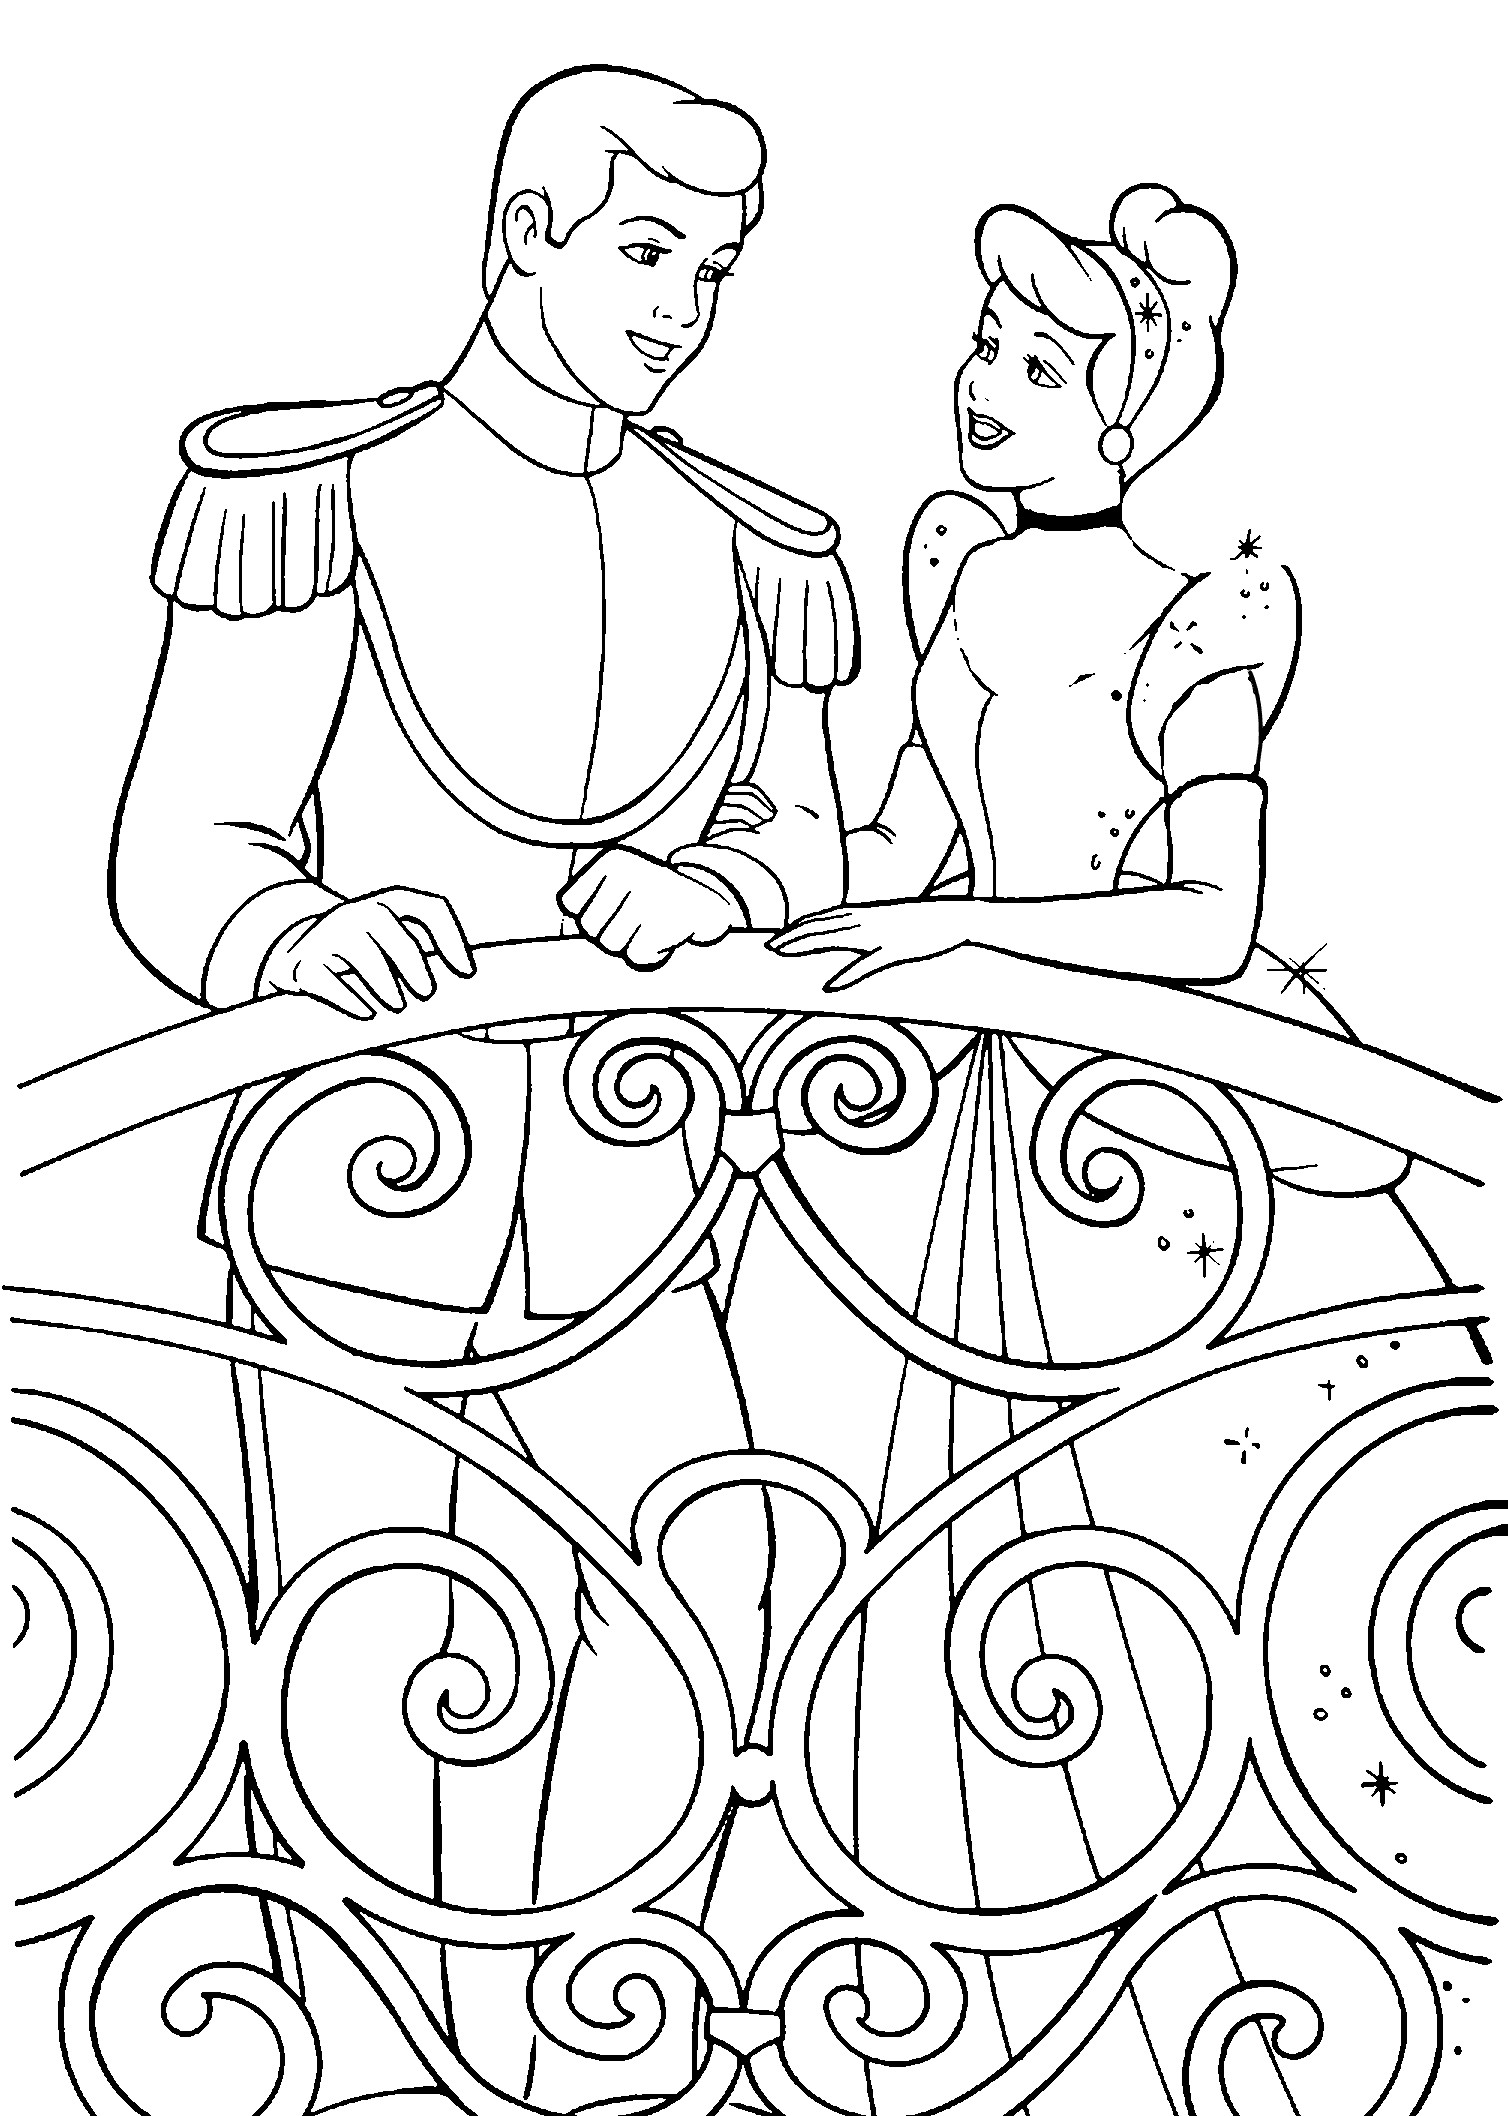 Free Coloring Sheets Disney
 Free Printable Disney Princess Coloring Pages For Kids